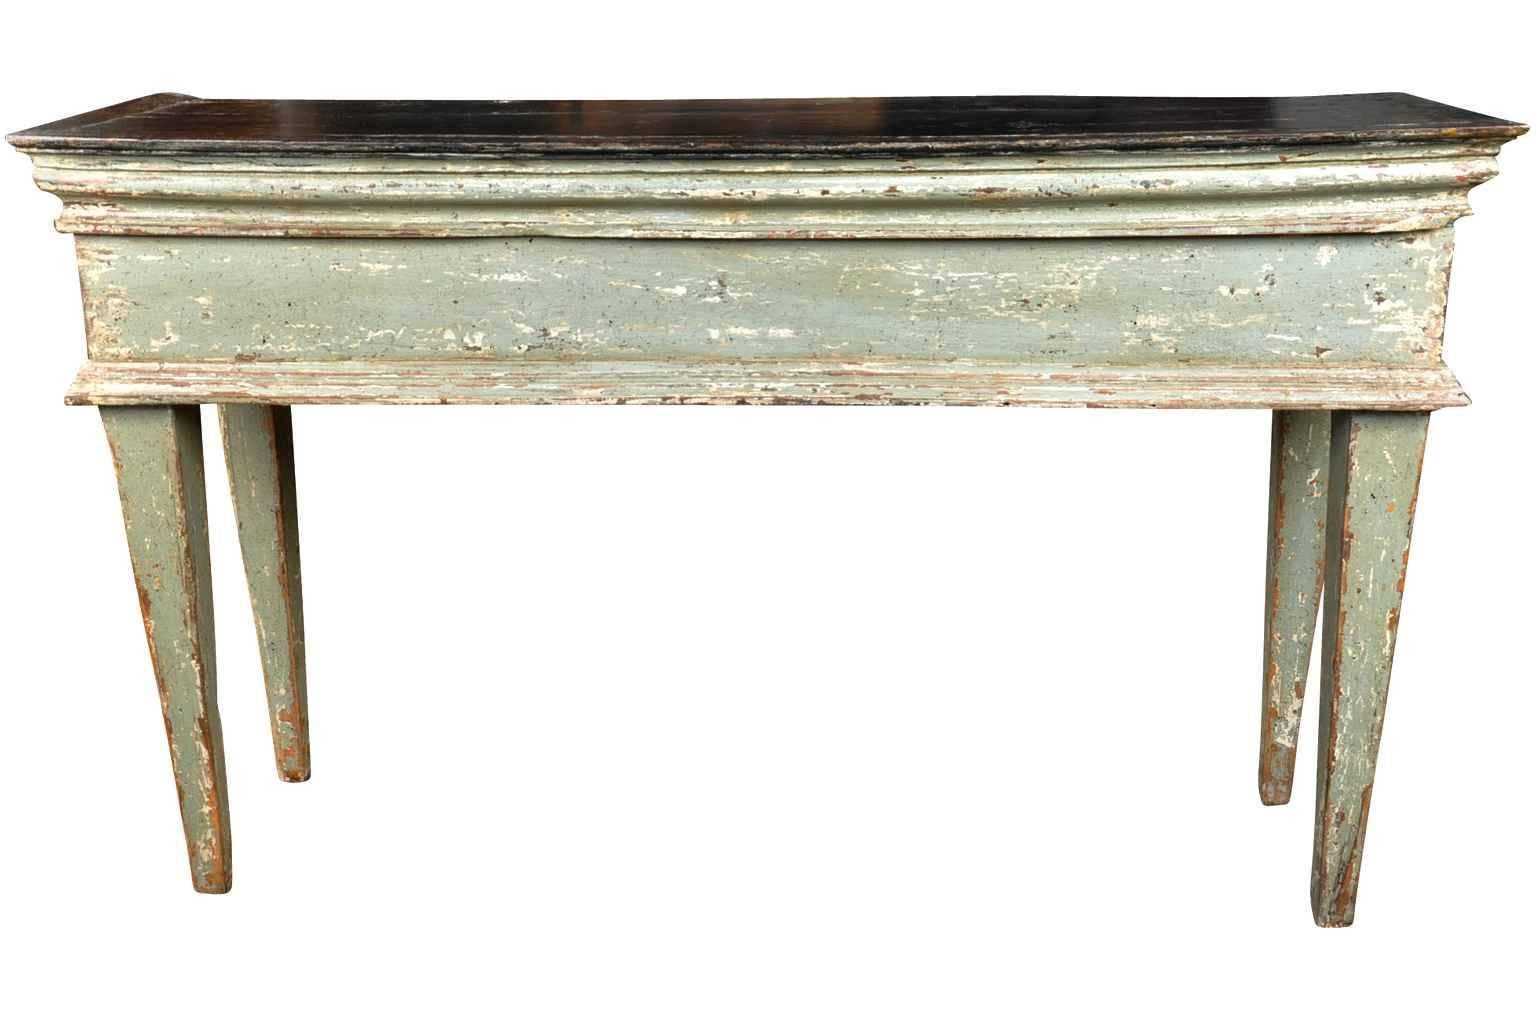 A very handsome early 19th century painted console from the Catalan region of Spain. The painted finish has a wonderful patina'd texture in wonderful hues of soft sage with an almost black top surface. An excellent piece for any living or dining